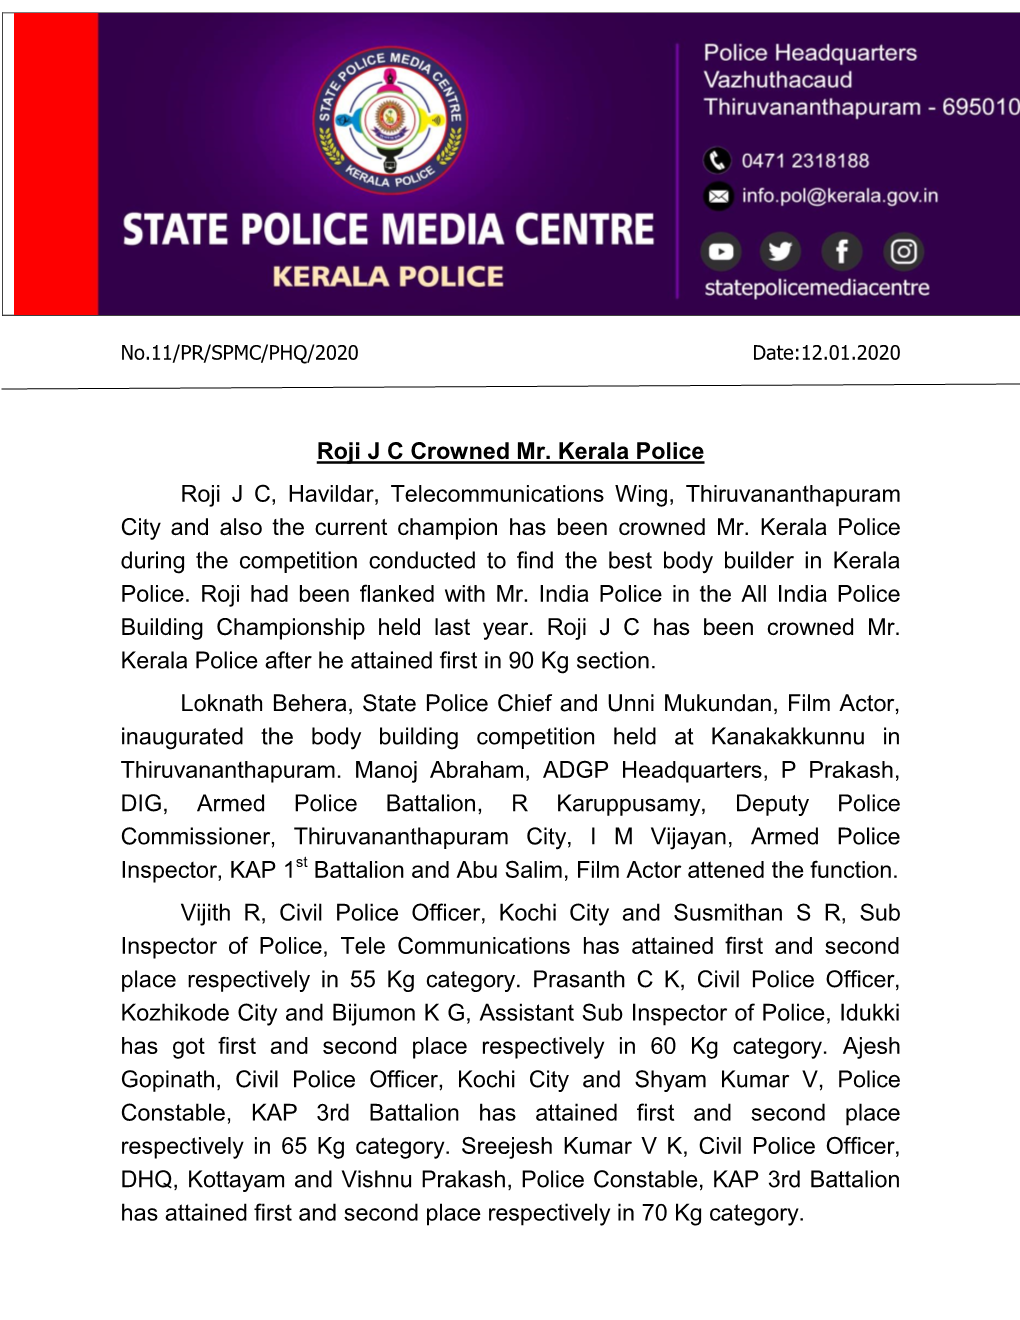 Roji J C Crowned Mr. Kerala Police Roji J C, Havildar, Telecommunications Wing, Thiruvananthapuram City and Also the Current Champion Has Been Crowned Mr